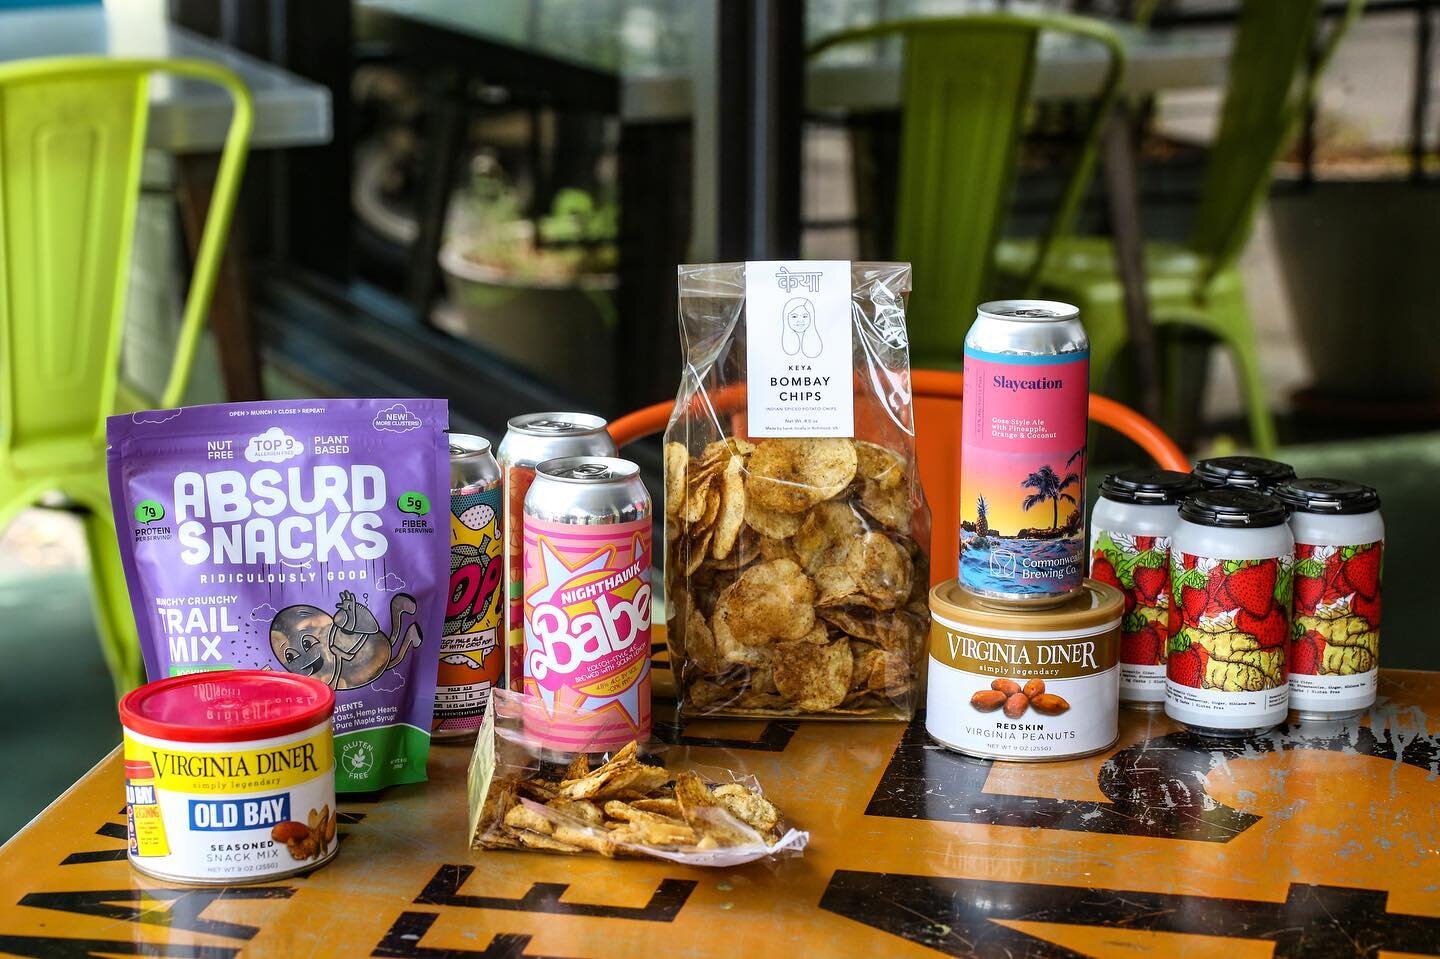 Need some snacks for a day on the river? Here are a few local picks! 🚣🏼&zwj;♀️for a day of fun! 🌞

@ardentcraftales 
@absurd.snacks 
@nighthawkbrewery 
@potterscraftcider 
@vadinerpeanuts 
@keyaandco chips!

#rvariver #rivah #jamesriver #rvaeats #